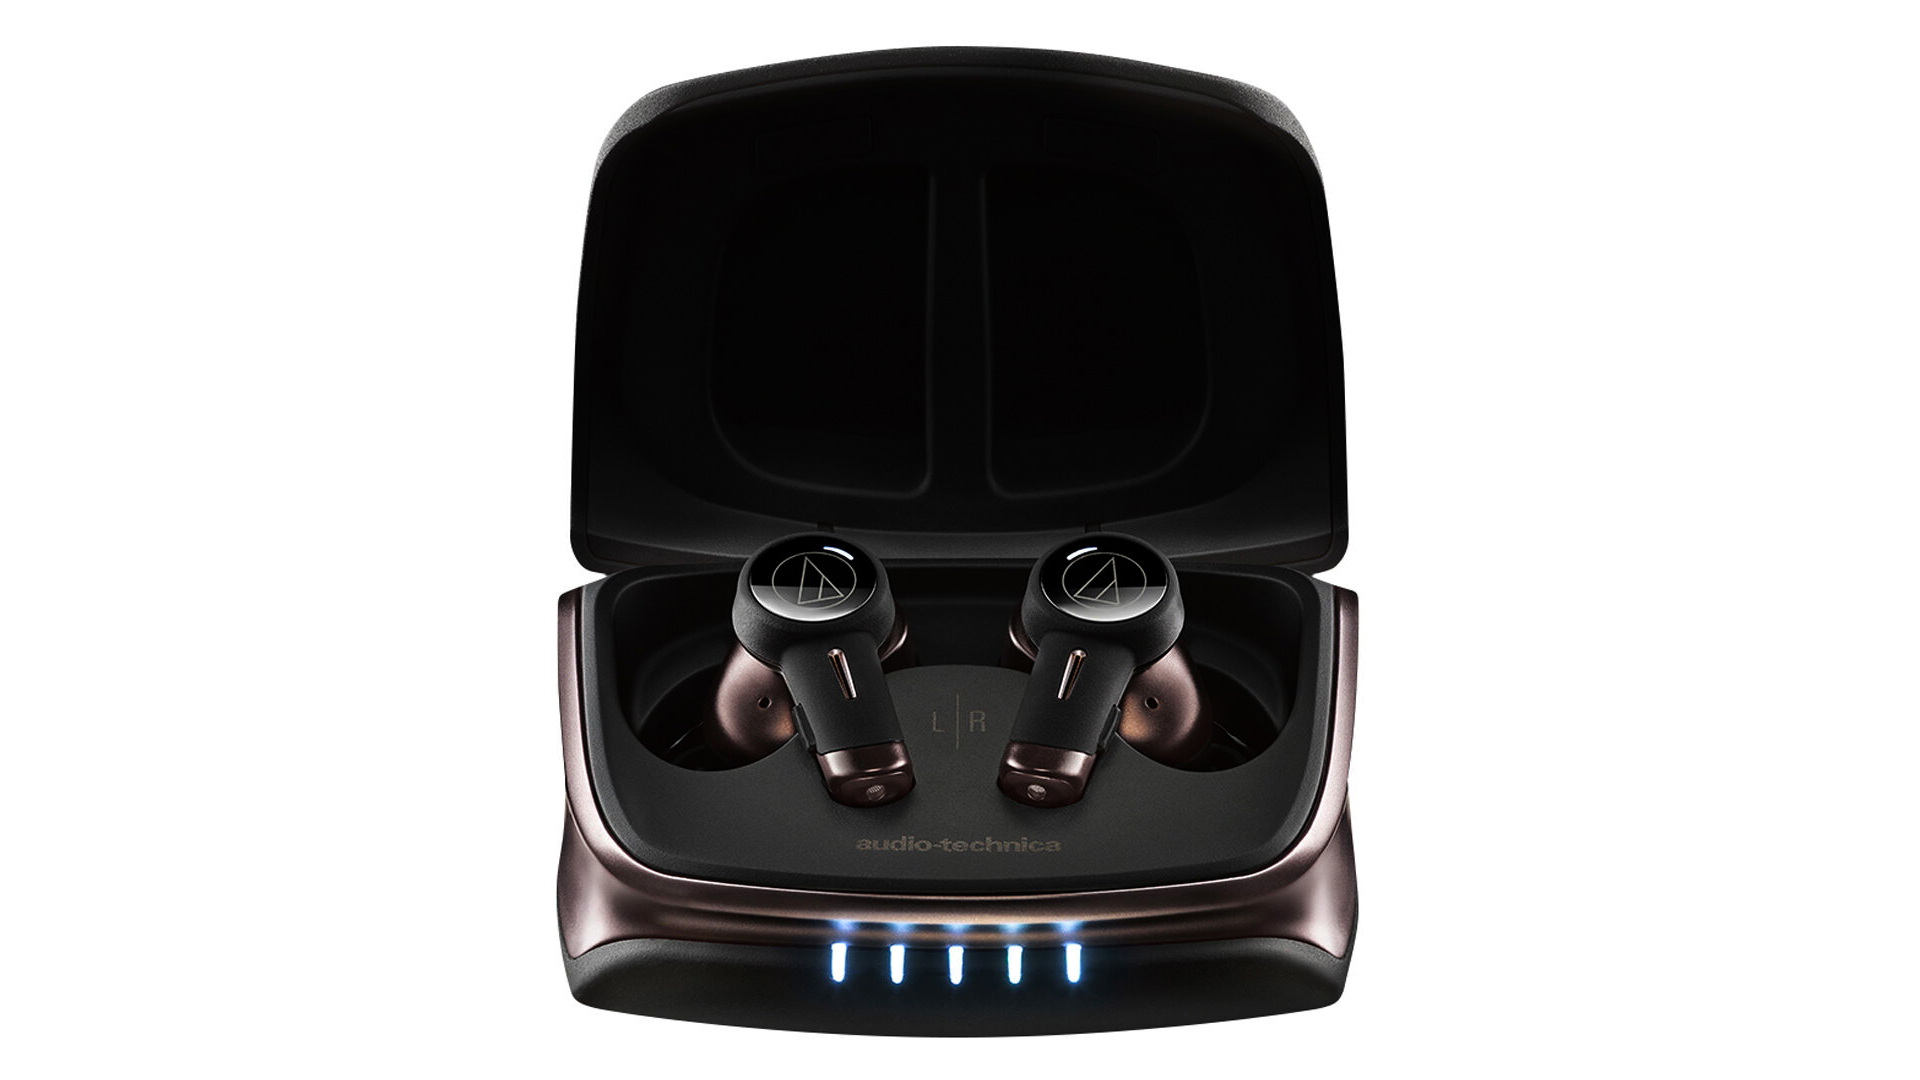 The Audio-Technica ATH-TWX9 earbuds in their UV-sterilizing charging case.